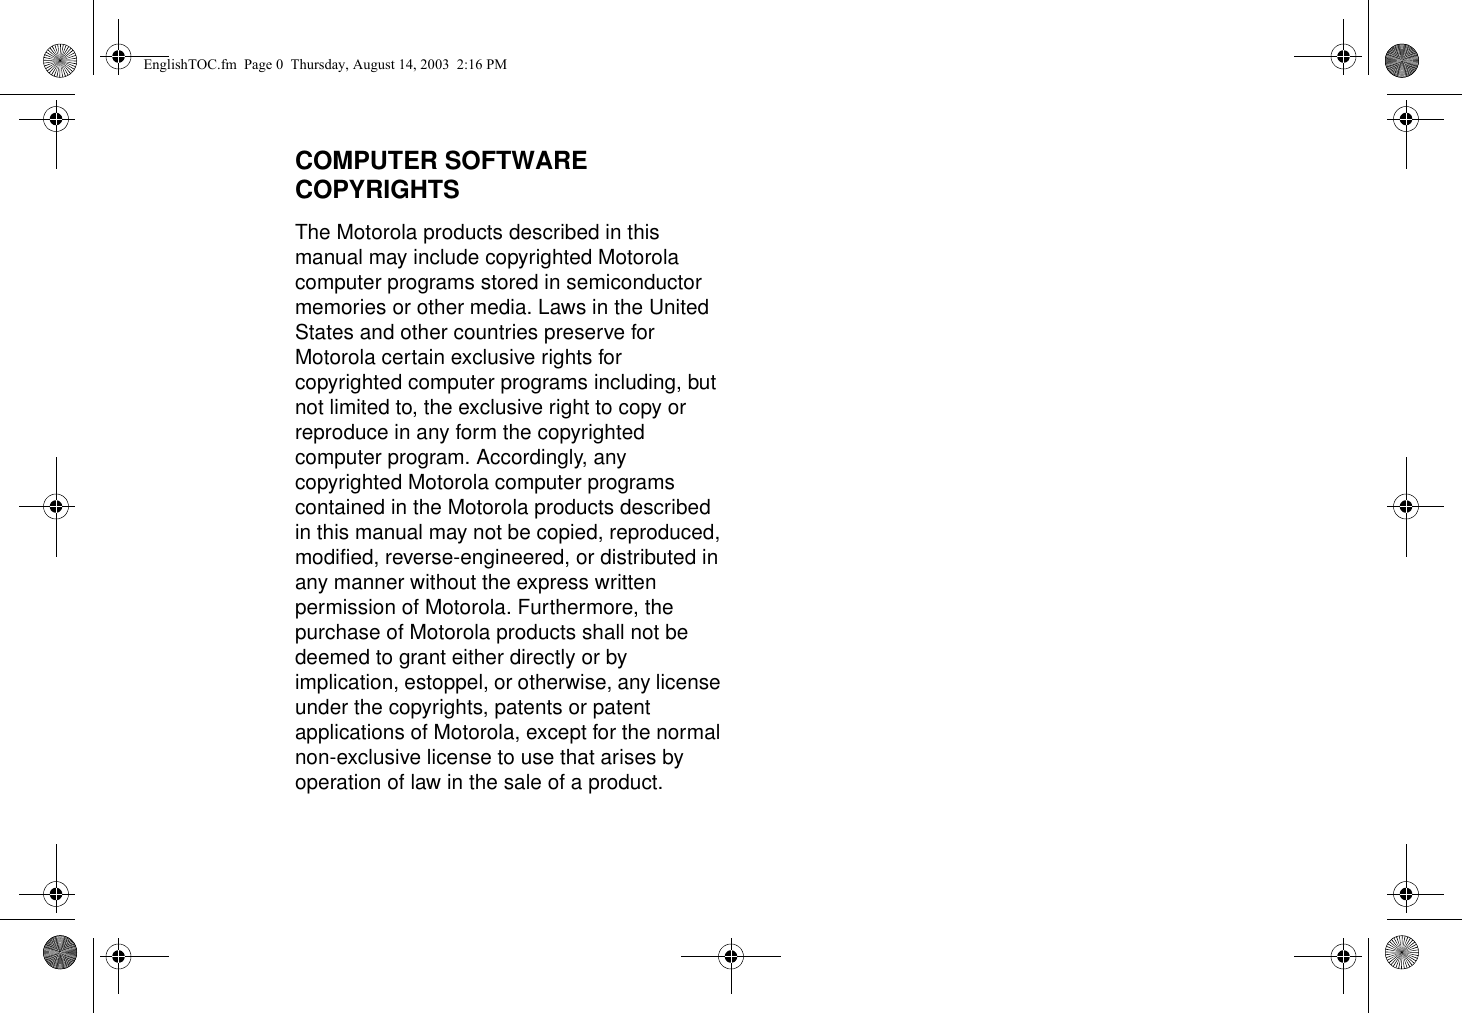 COMPUTER SOFTWARE COPYRIGHTSThe Motorola products described in this manual may include copyrighted Motorola computer programs stored in semiconductor memories or other media. Laws in the United States and other countries preserve for Motorola certain exclusive rights for copyrighted computer programs including, but not limited to, the exclusive right to copy or reproduce in any form the copyrighted computer program. Accordingly, any copyrighted Motorola computer programs contained in the Motorola products described in this manual may not be copied, reproduced, modified, reverse-engineered, or distributed in any manner without the express written permission of Motorola. Furthermore, the purchase of Motorola products shall not be deemed to grant either directly or by implication, estoppel, or otherwise, any license under the copyrights, patents or patent applications of Motorola, except for the normal non-exclusive license to use that arises by operation of law in the sale of a product.EnglishTOC.fm  Page 0  Thursday, August 14, 2003  2:16 PM